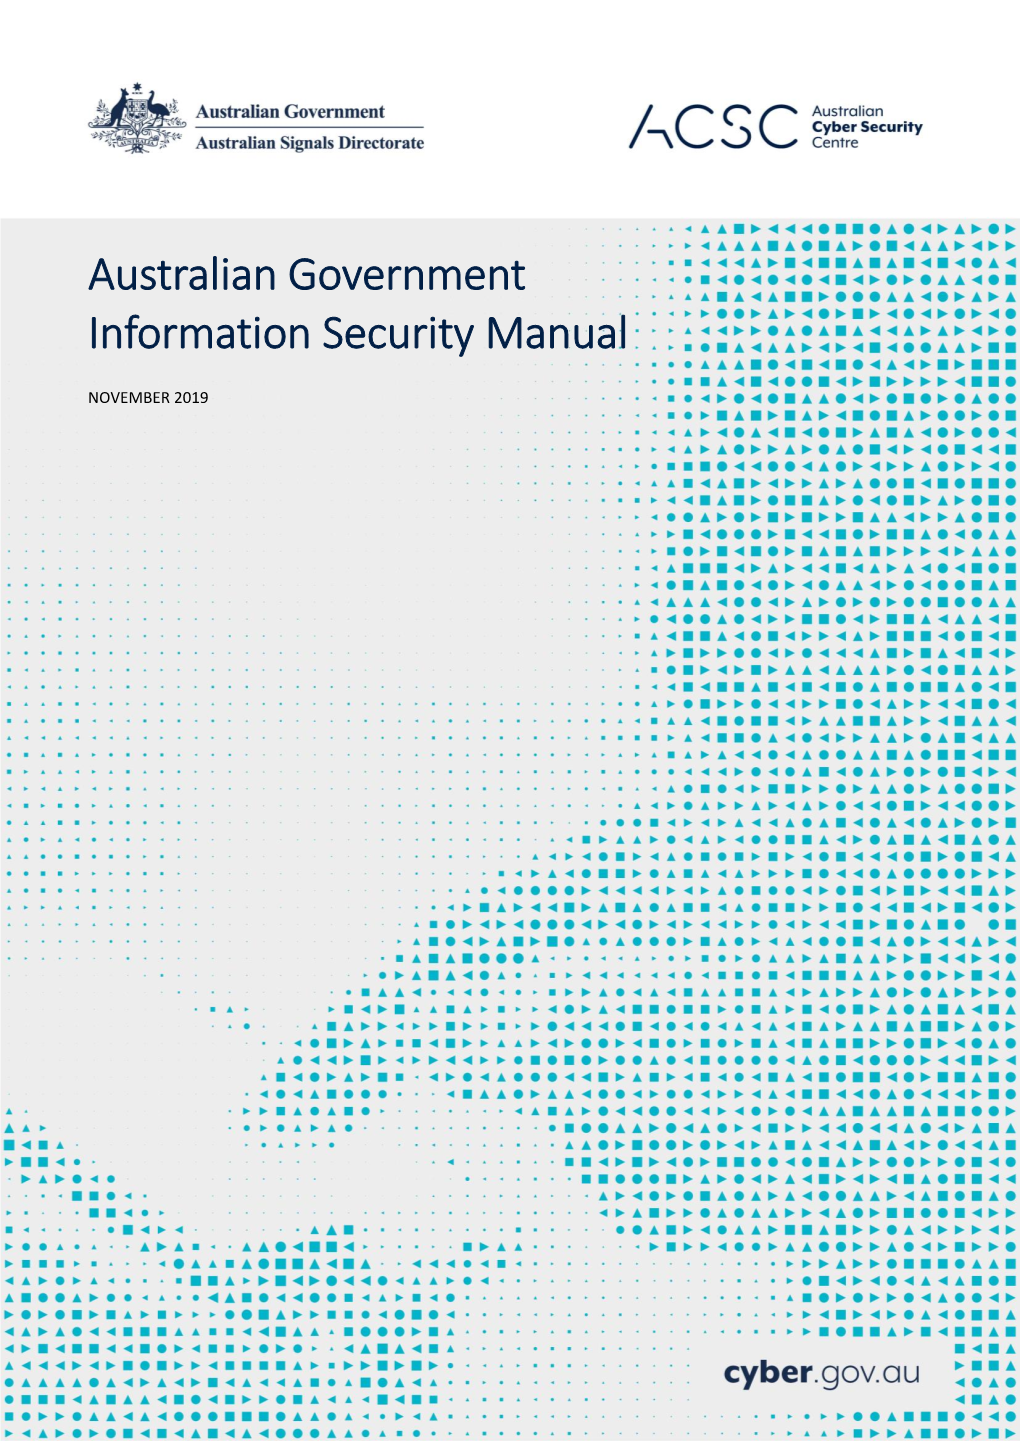 Australian Government Information Security Manual